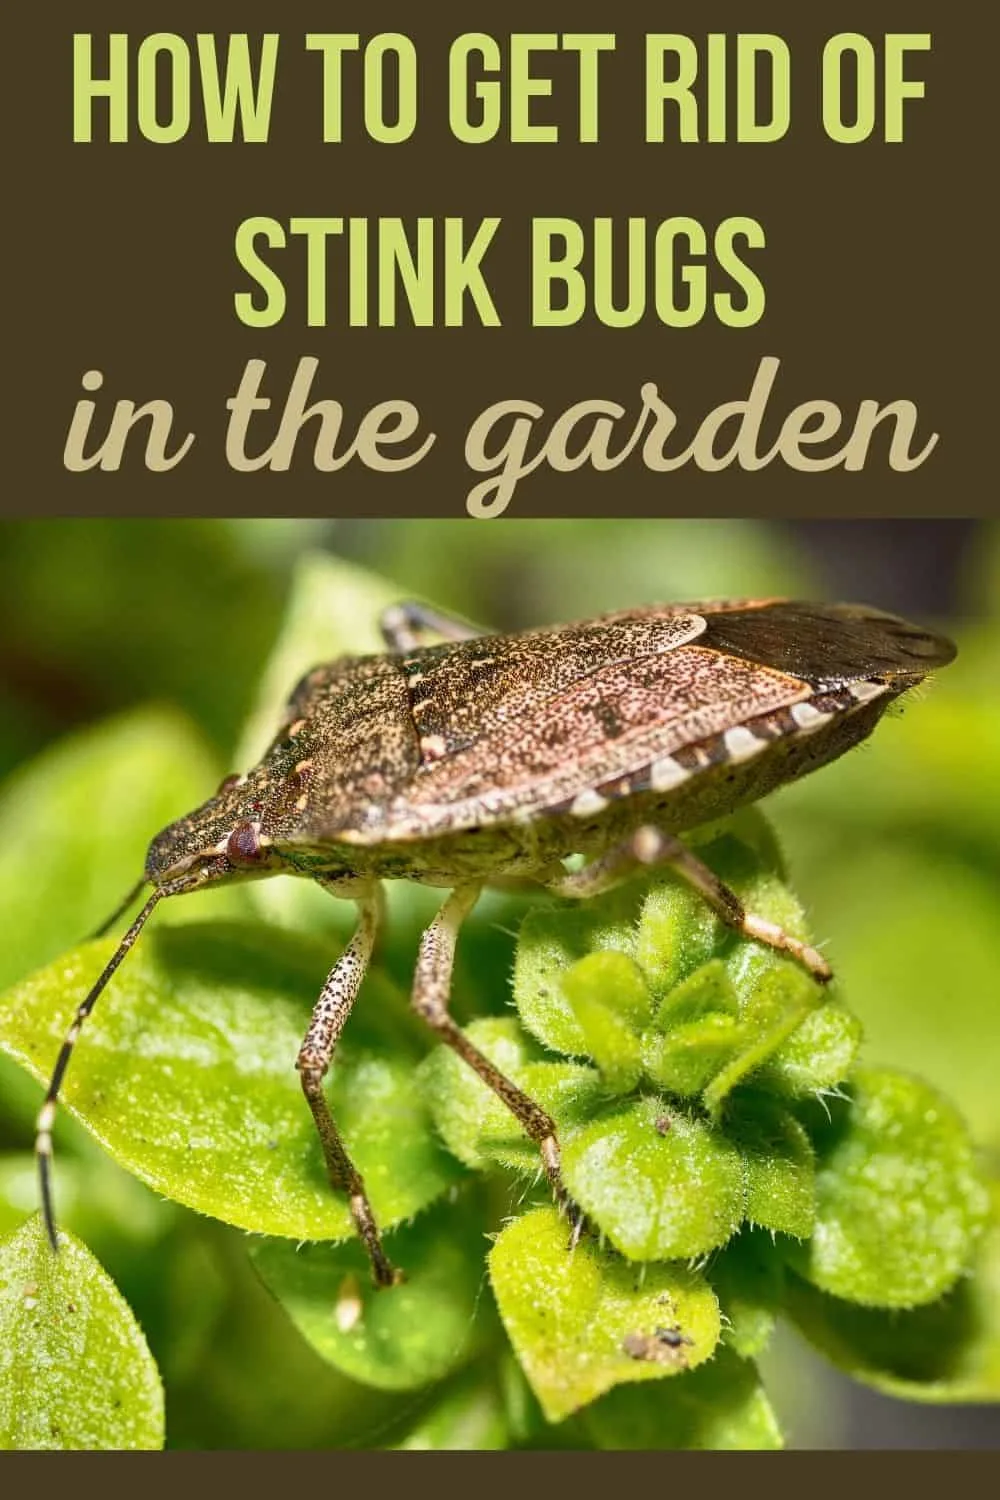 How to get rid of stink bugs in the garden